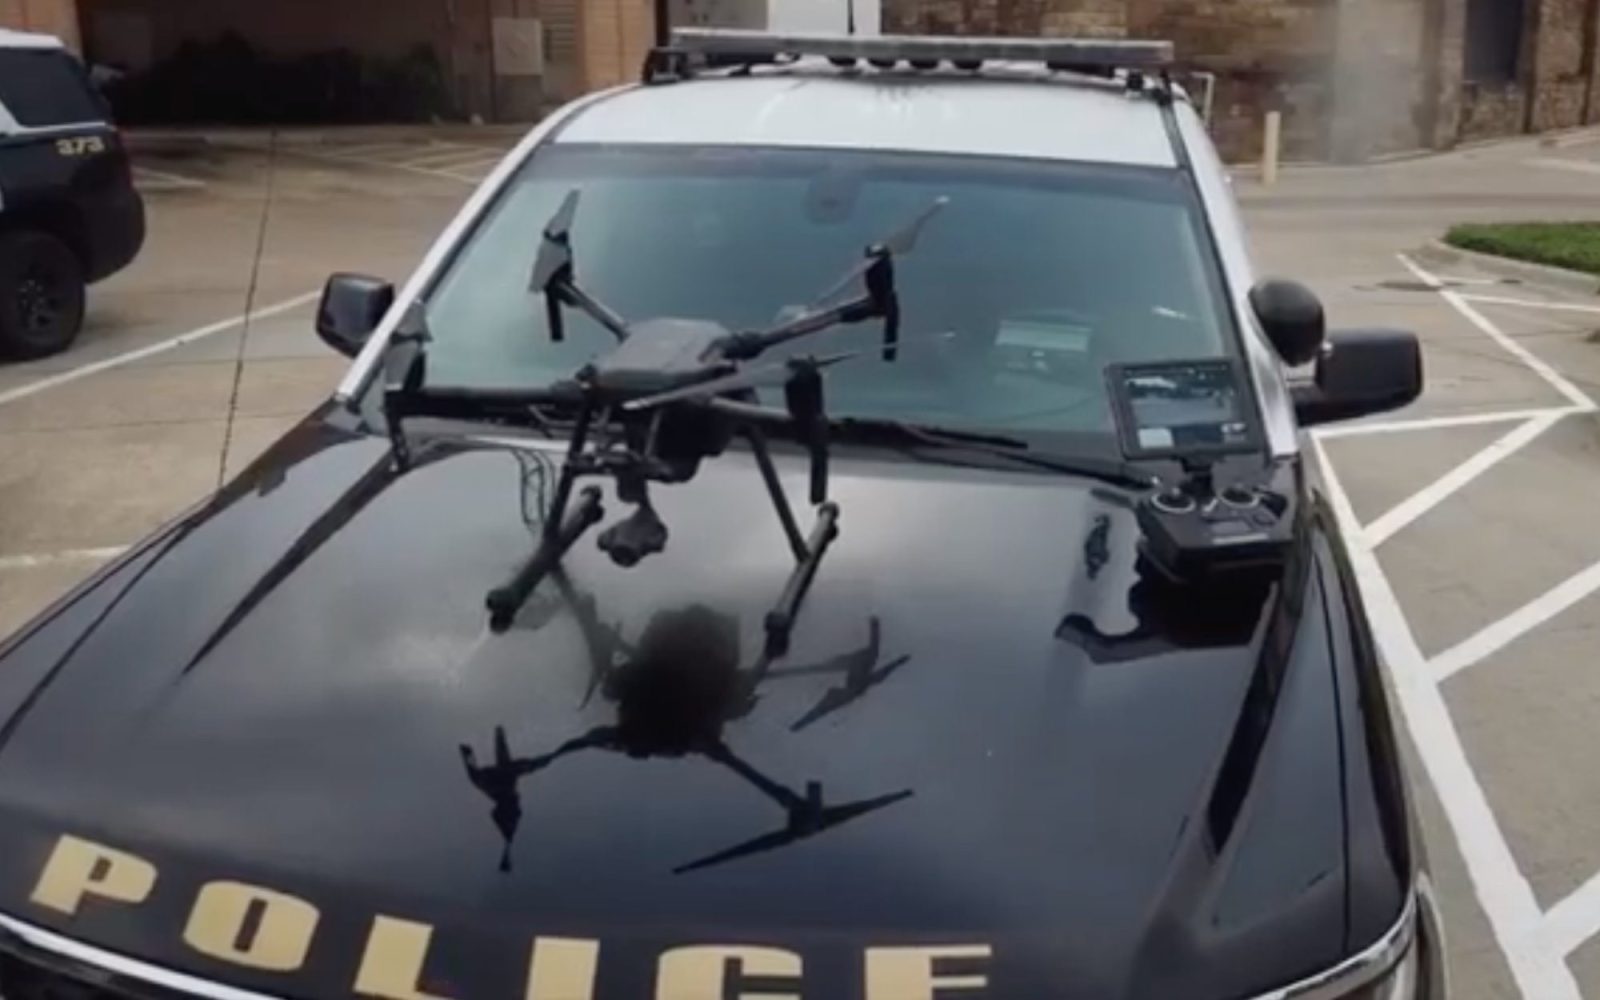 Irving Police Department launches drone program